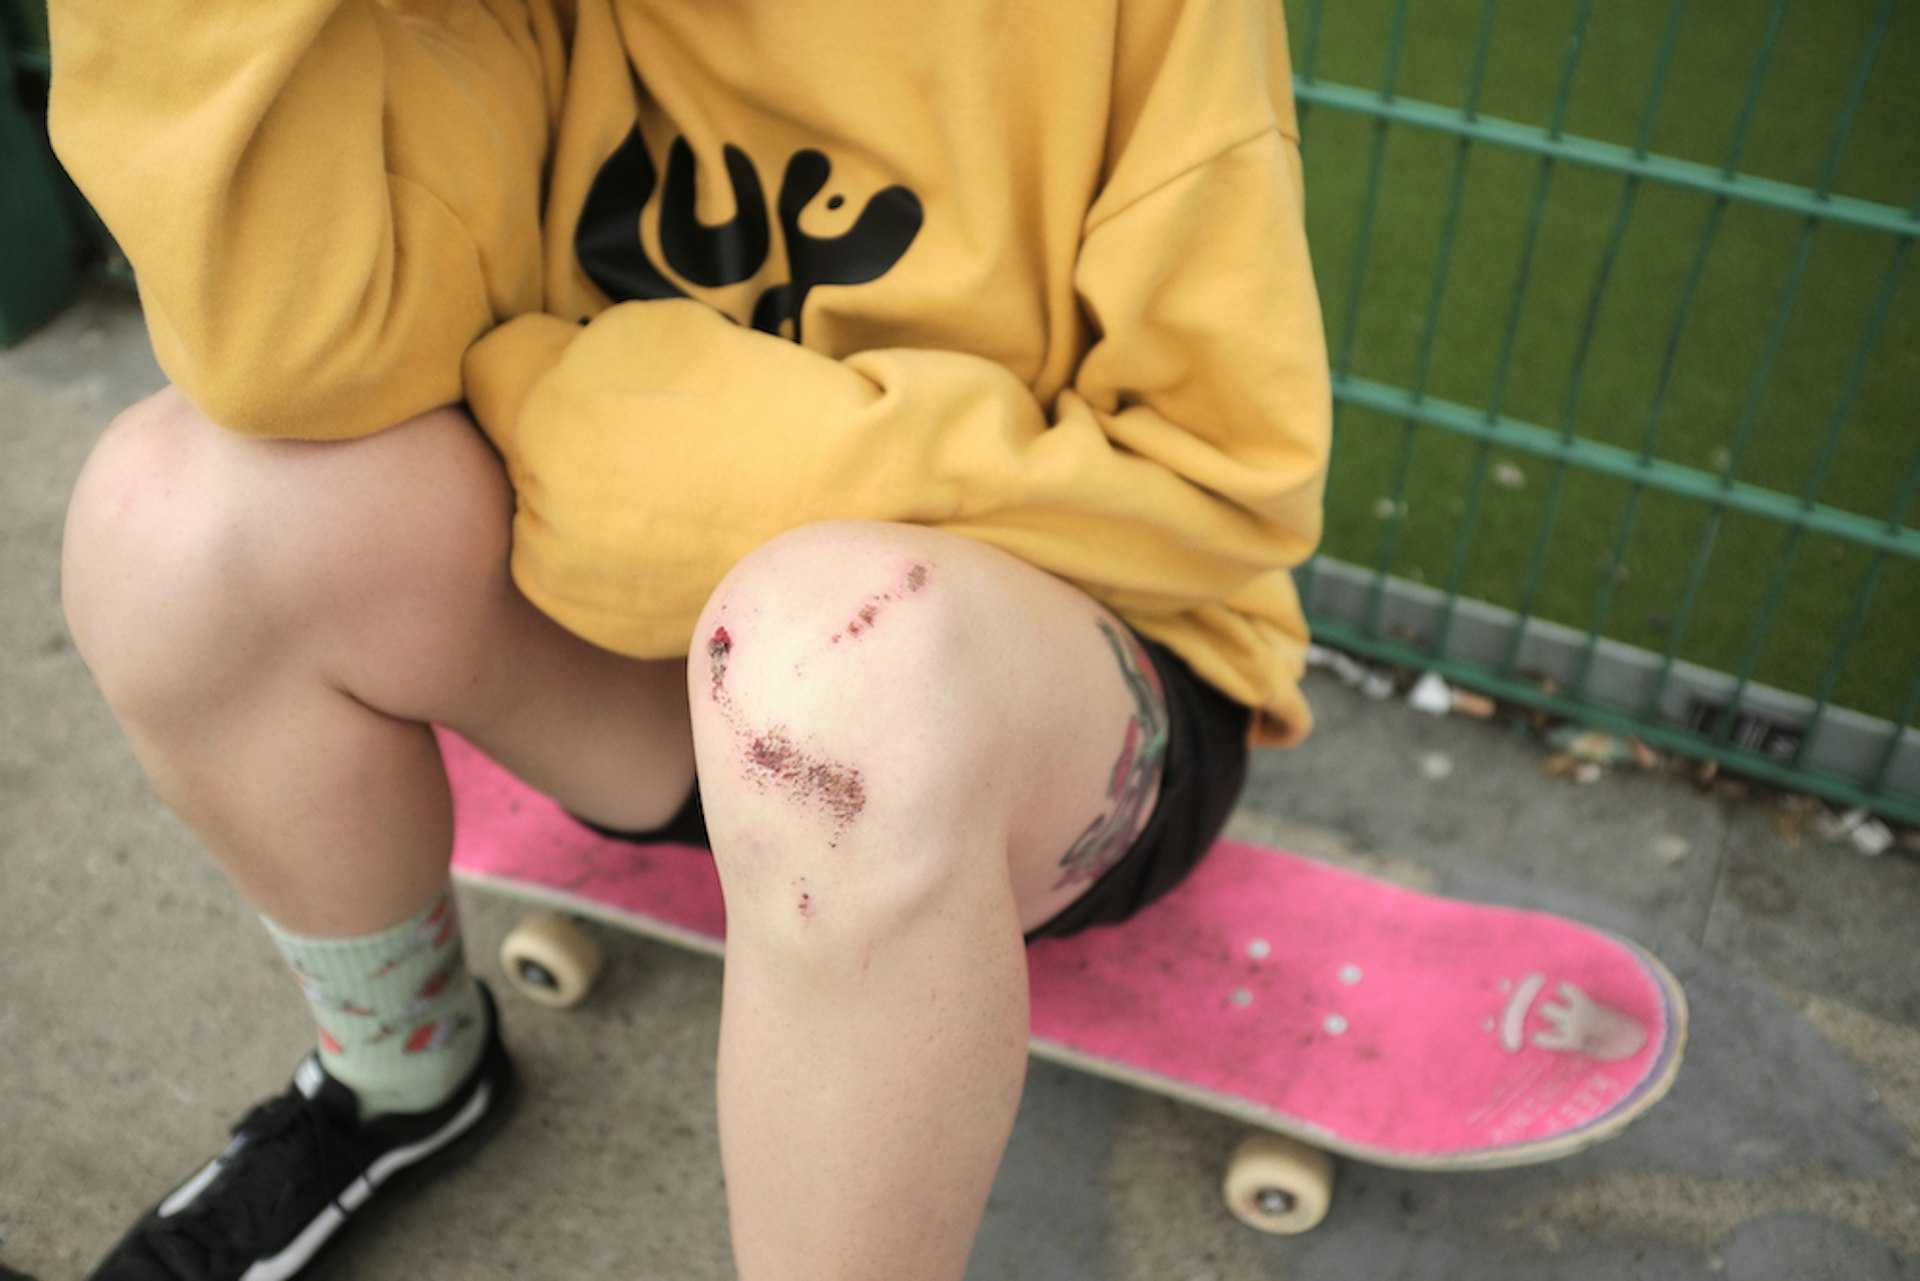 A skater sat on their skateboard in a yellow jumper, their grazed and bloodied knees on display